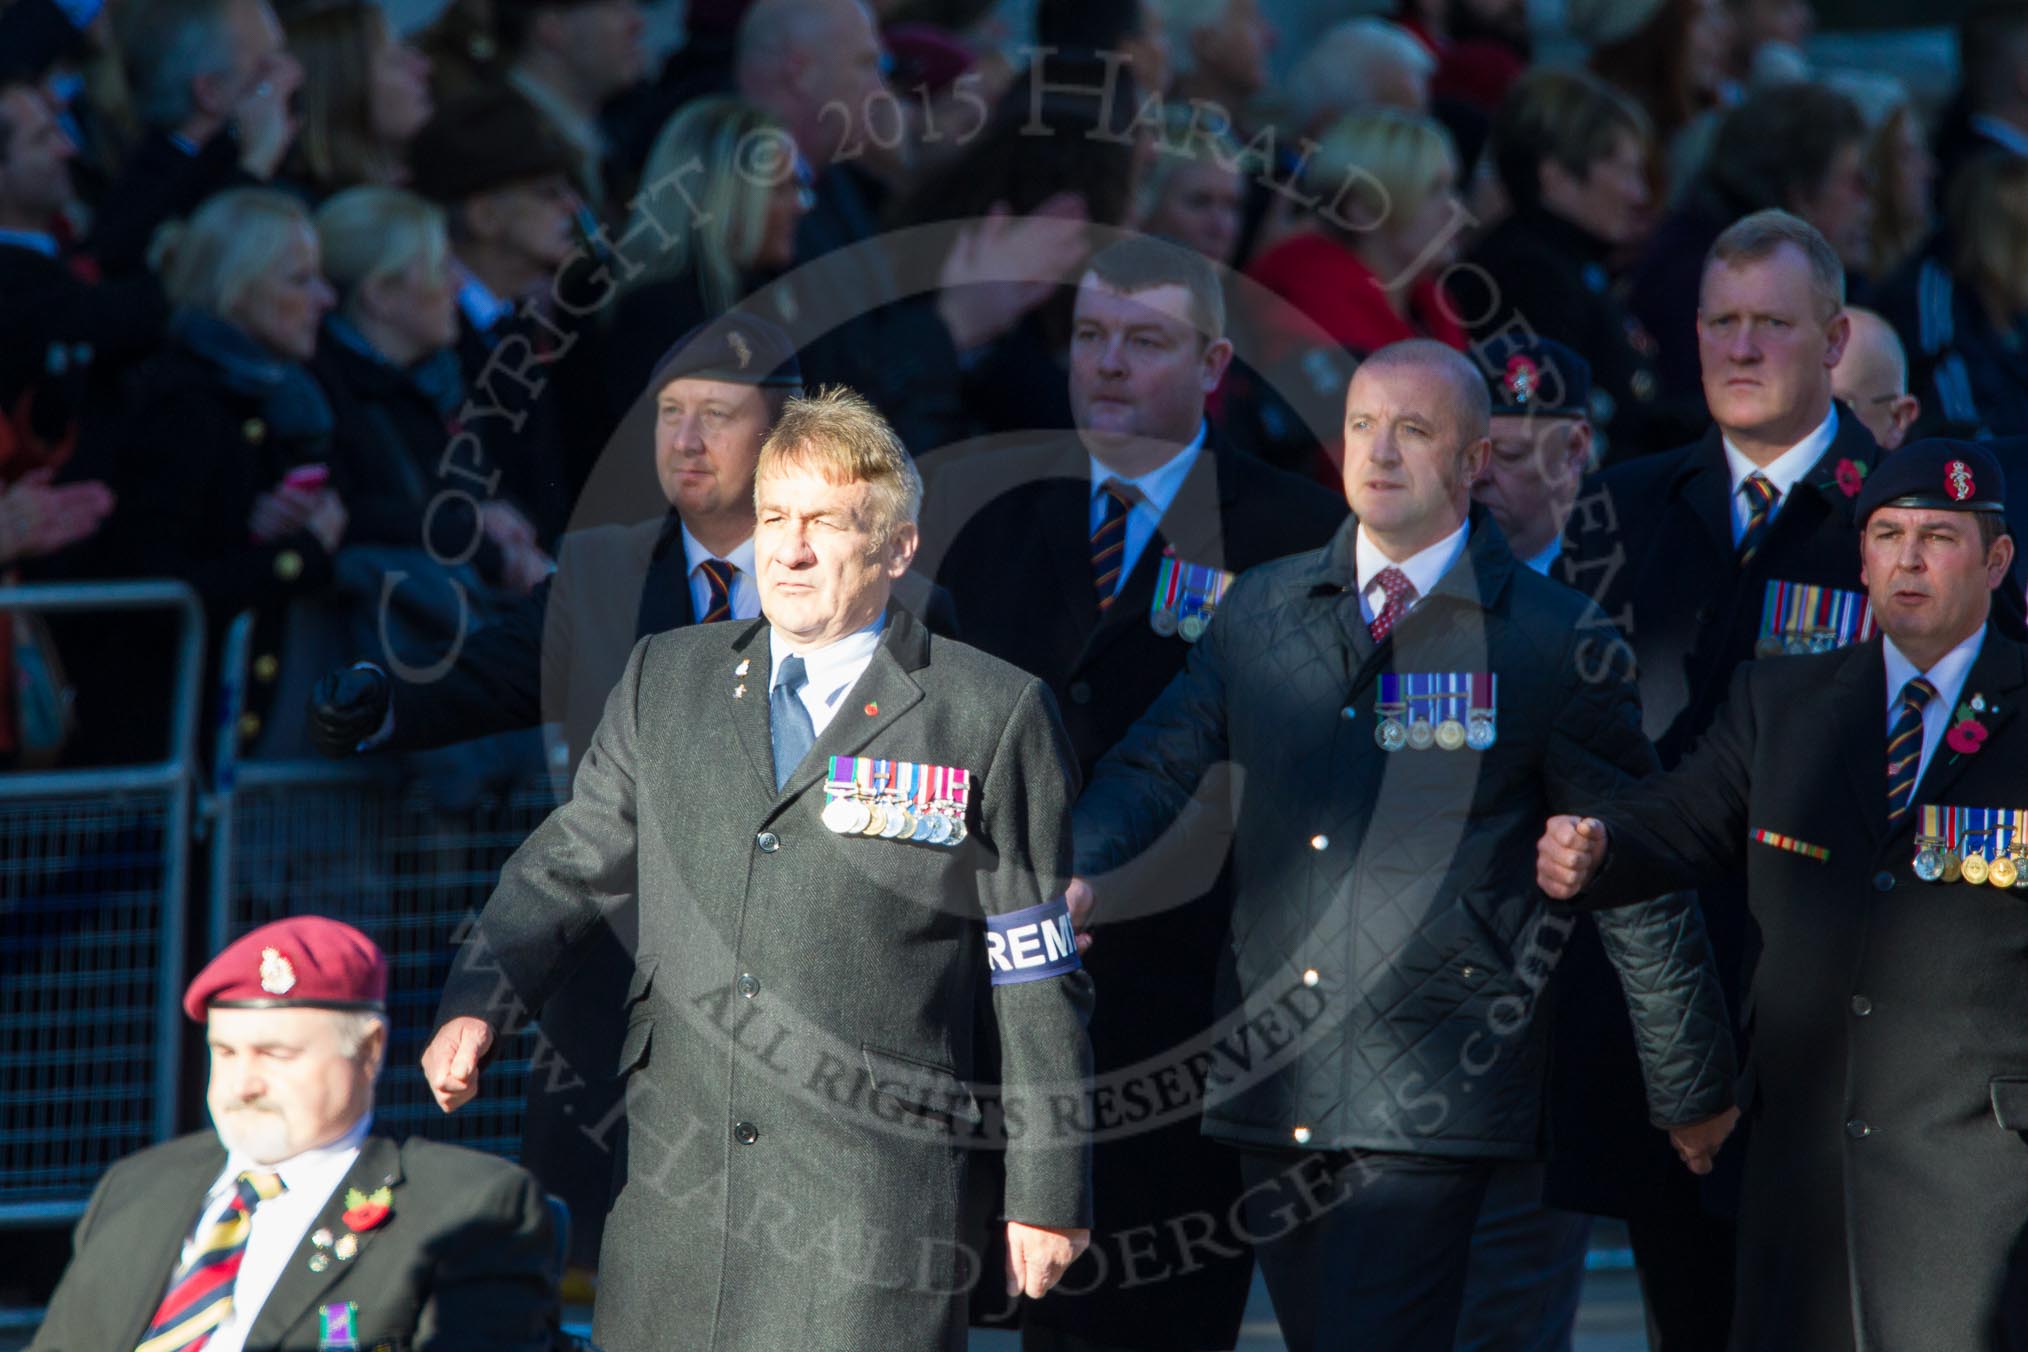 Remembrance Sunday Cenotaph March Past 2013: B32 - Royal Electrical & Mechanical Engineers Association..
Press stand opposite the Foreign Office building, Whitehall, London SW1,
London,
Greater London,
United Kingdom,
on 10 November 2013 at 12:03, image #1576